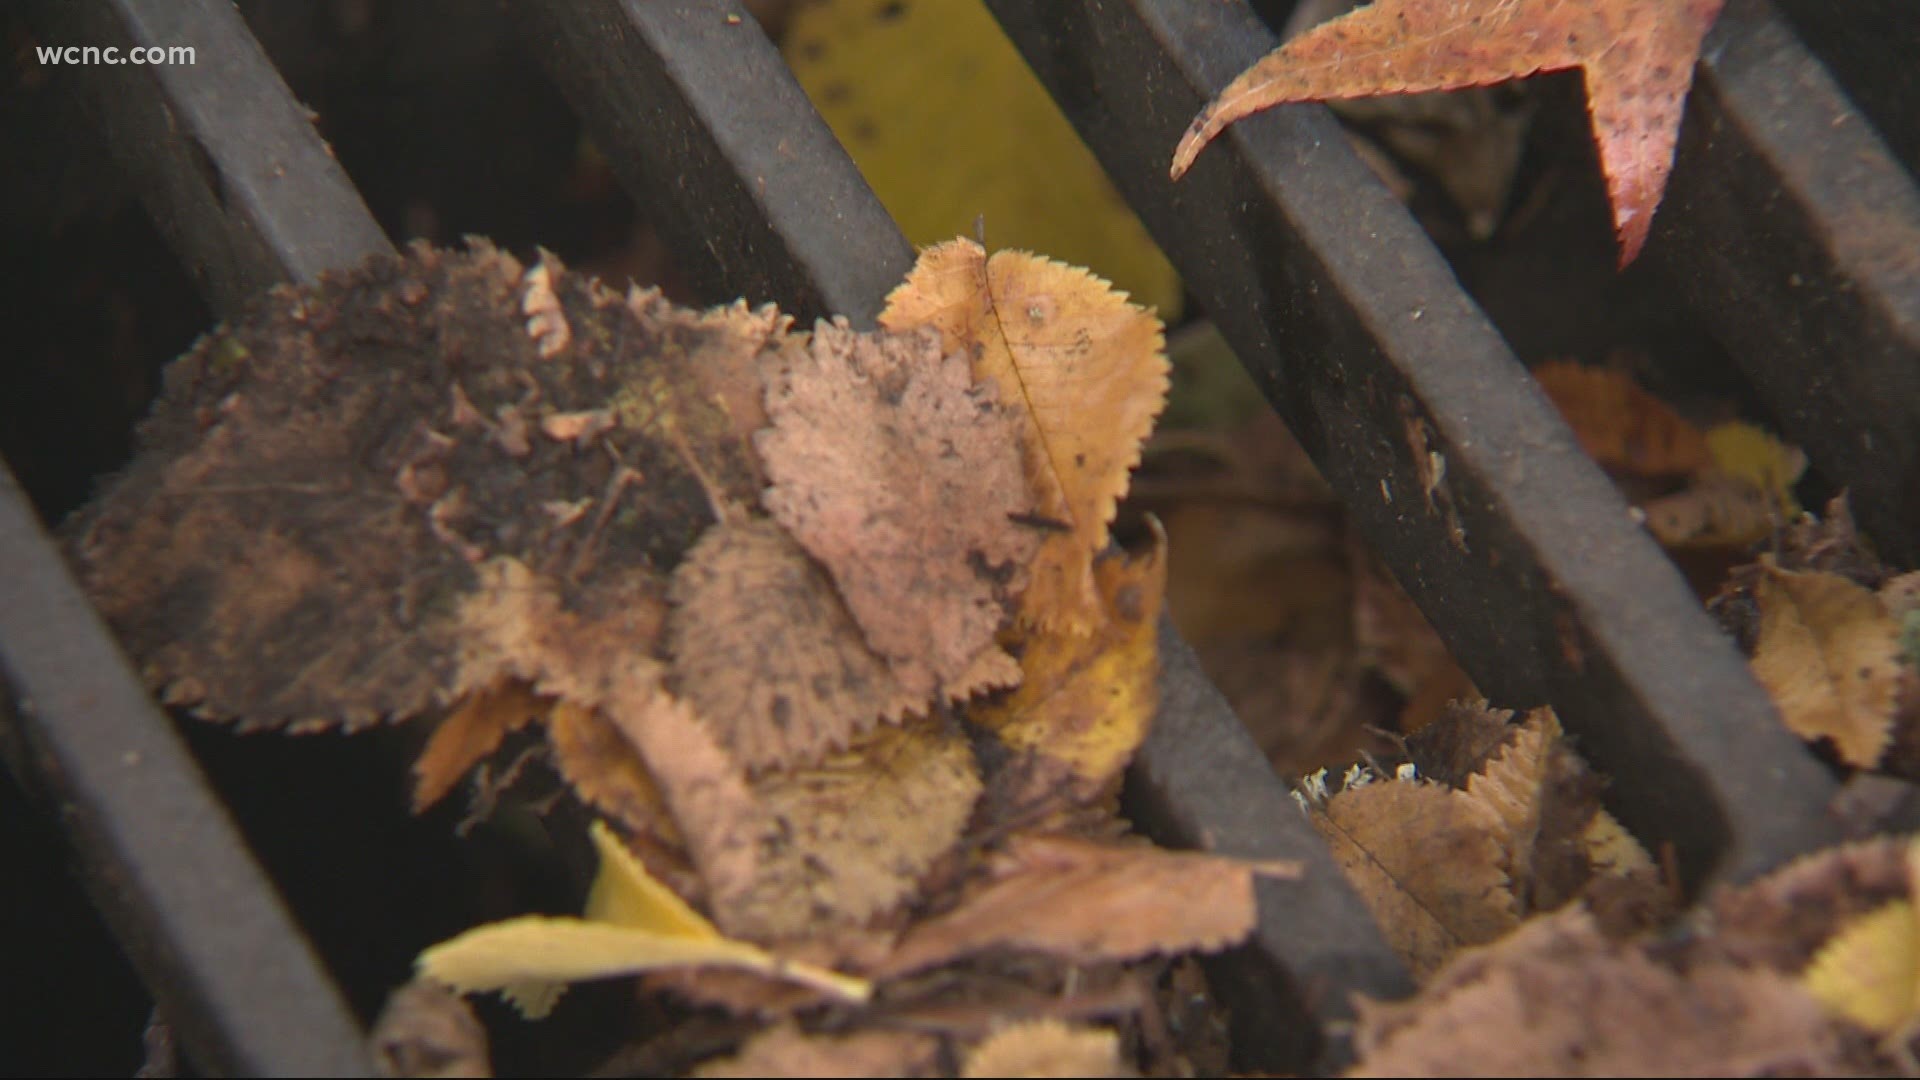 Especially during fall foliage, residents are reminded to clear storm drains ahead of storms.